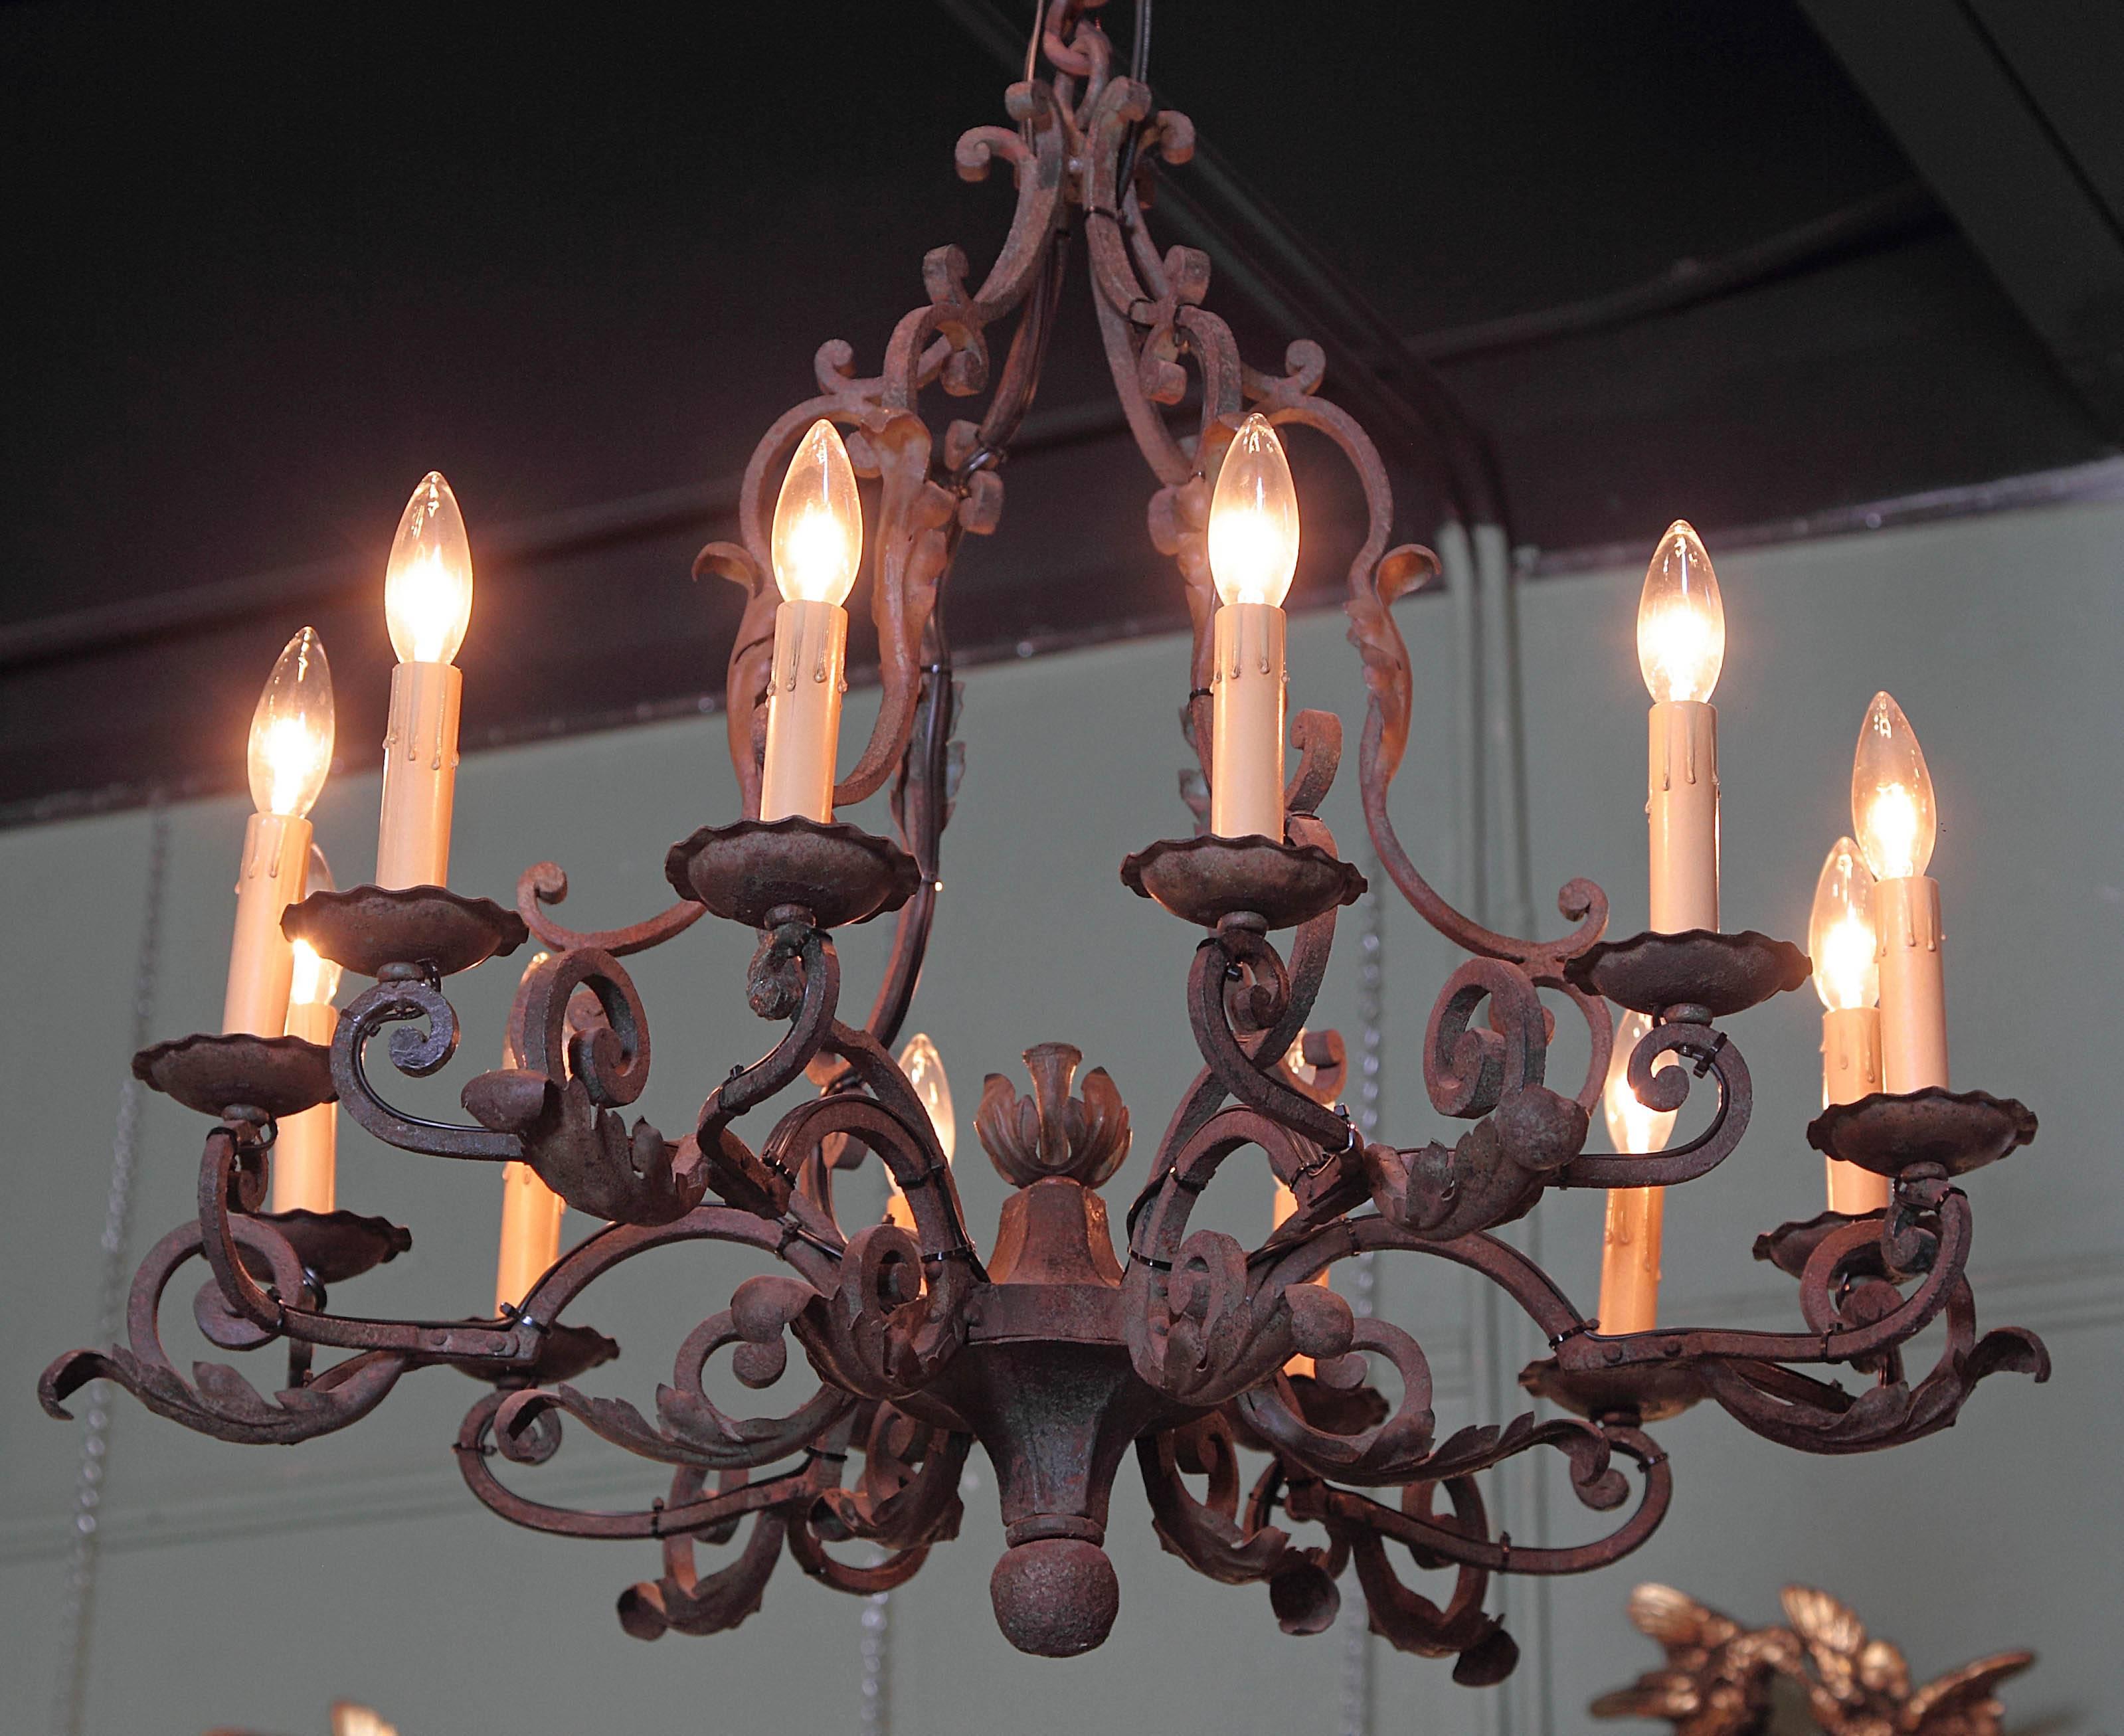 This elegant, antique chandelier was created in France, circa 1900. The round, iron light fixture features ten scrolled arms with light, decorative, high relief leaves, and a center floral finial at the base. The fixture has new wiring for easy use